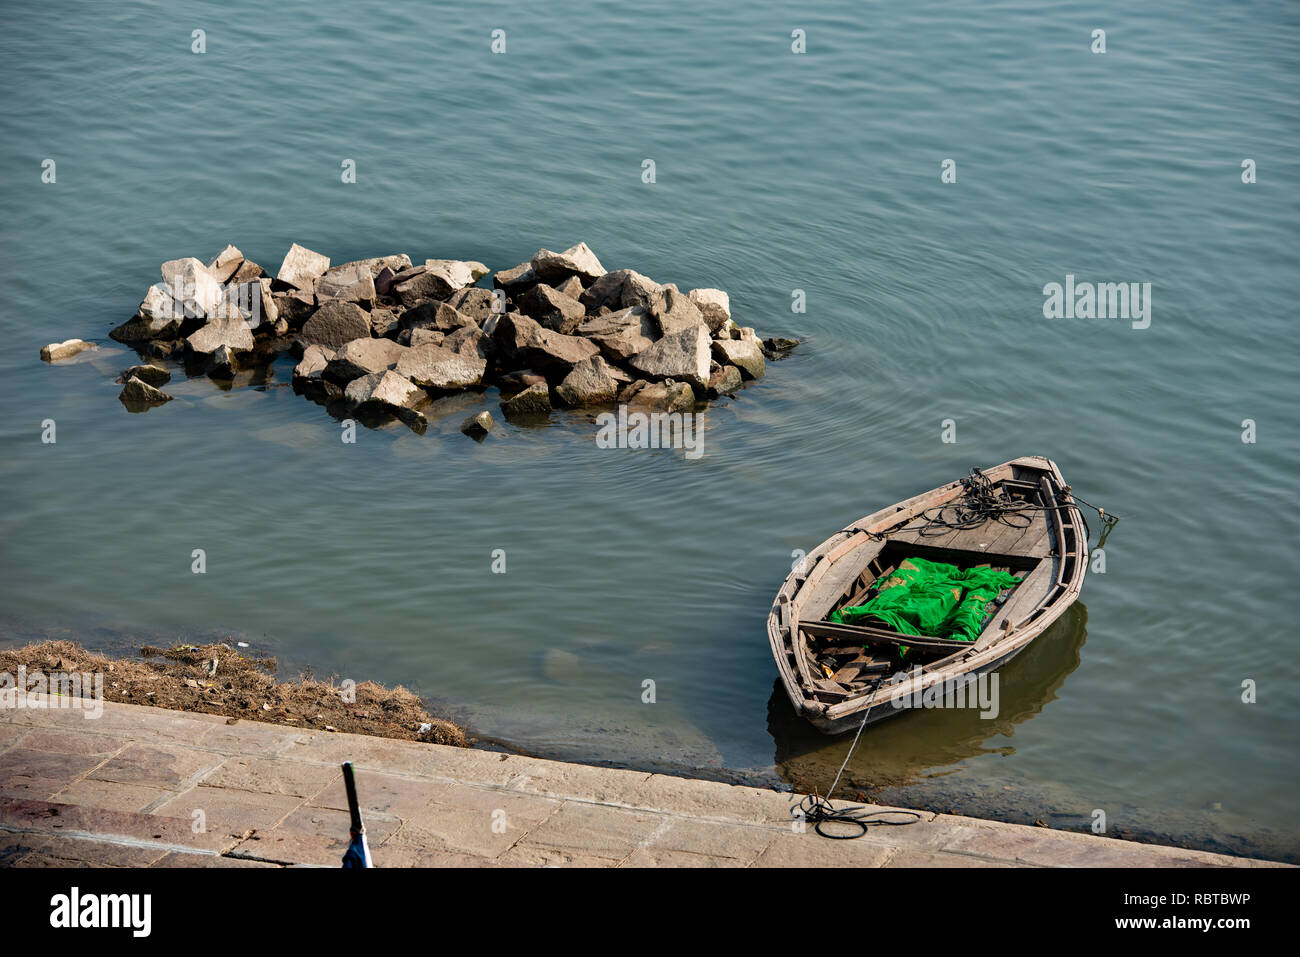 Composition with a moored boat  on the ghat and a pile of rocks in the Ganges in Varanasi, India. Stock Photo